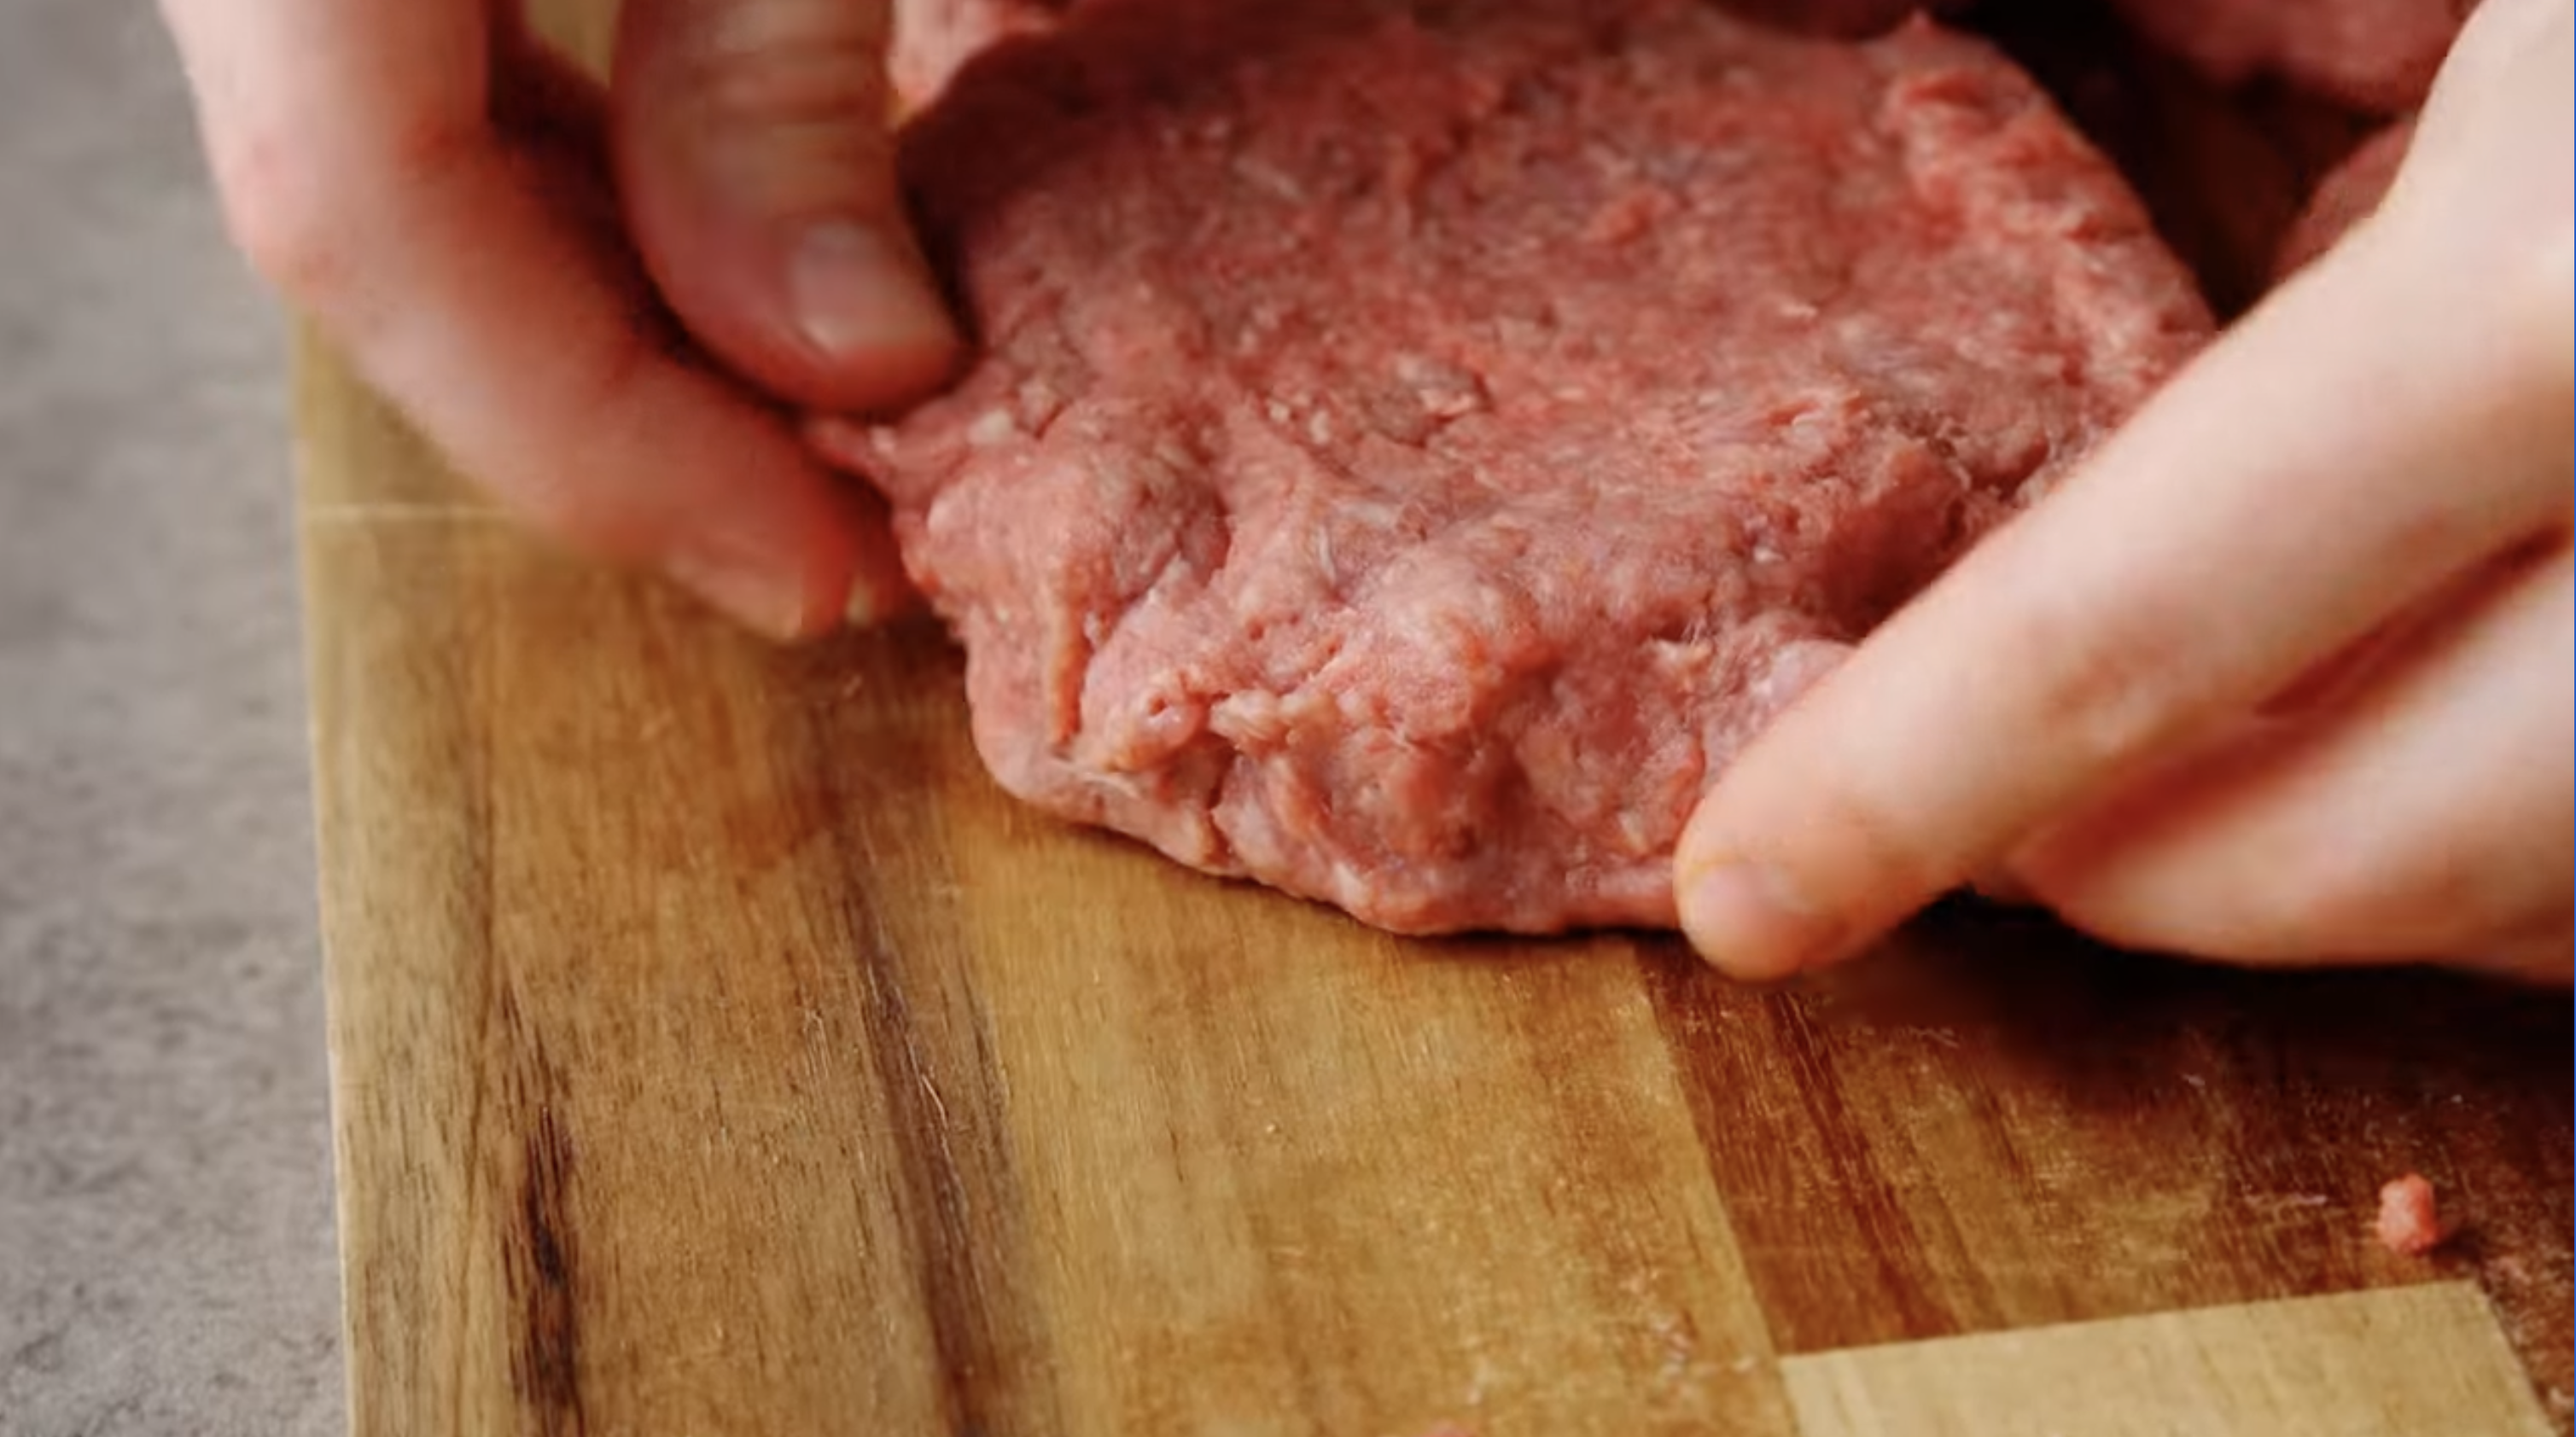 sealing a burger patty filled with cheese.